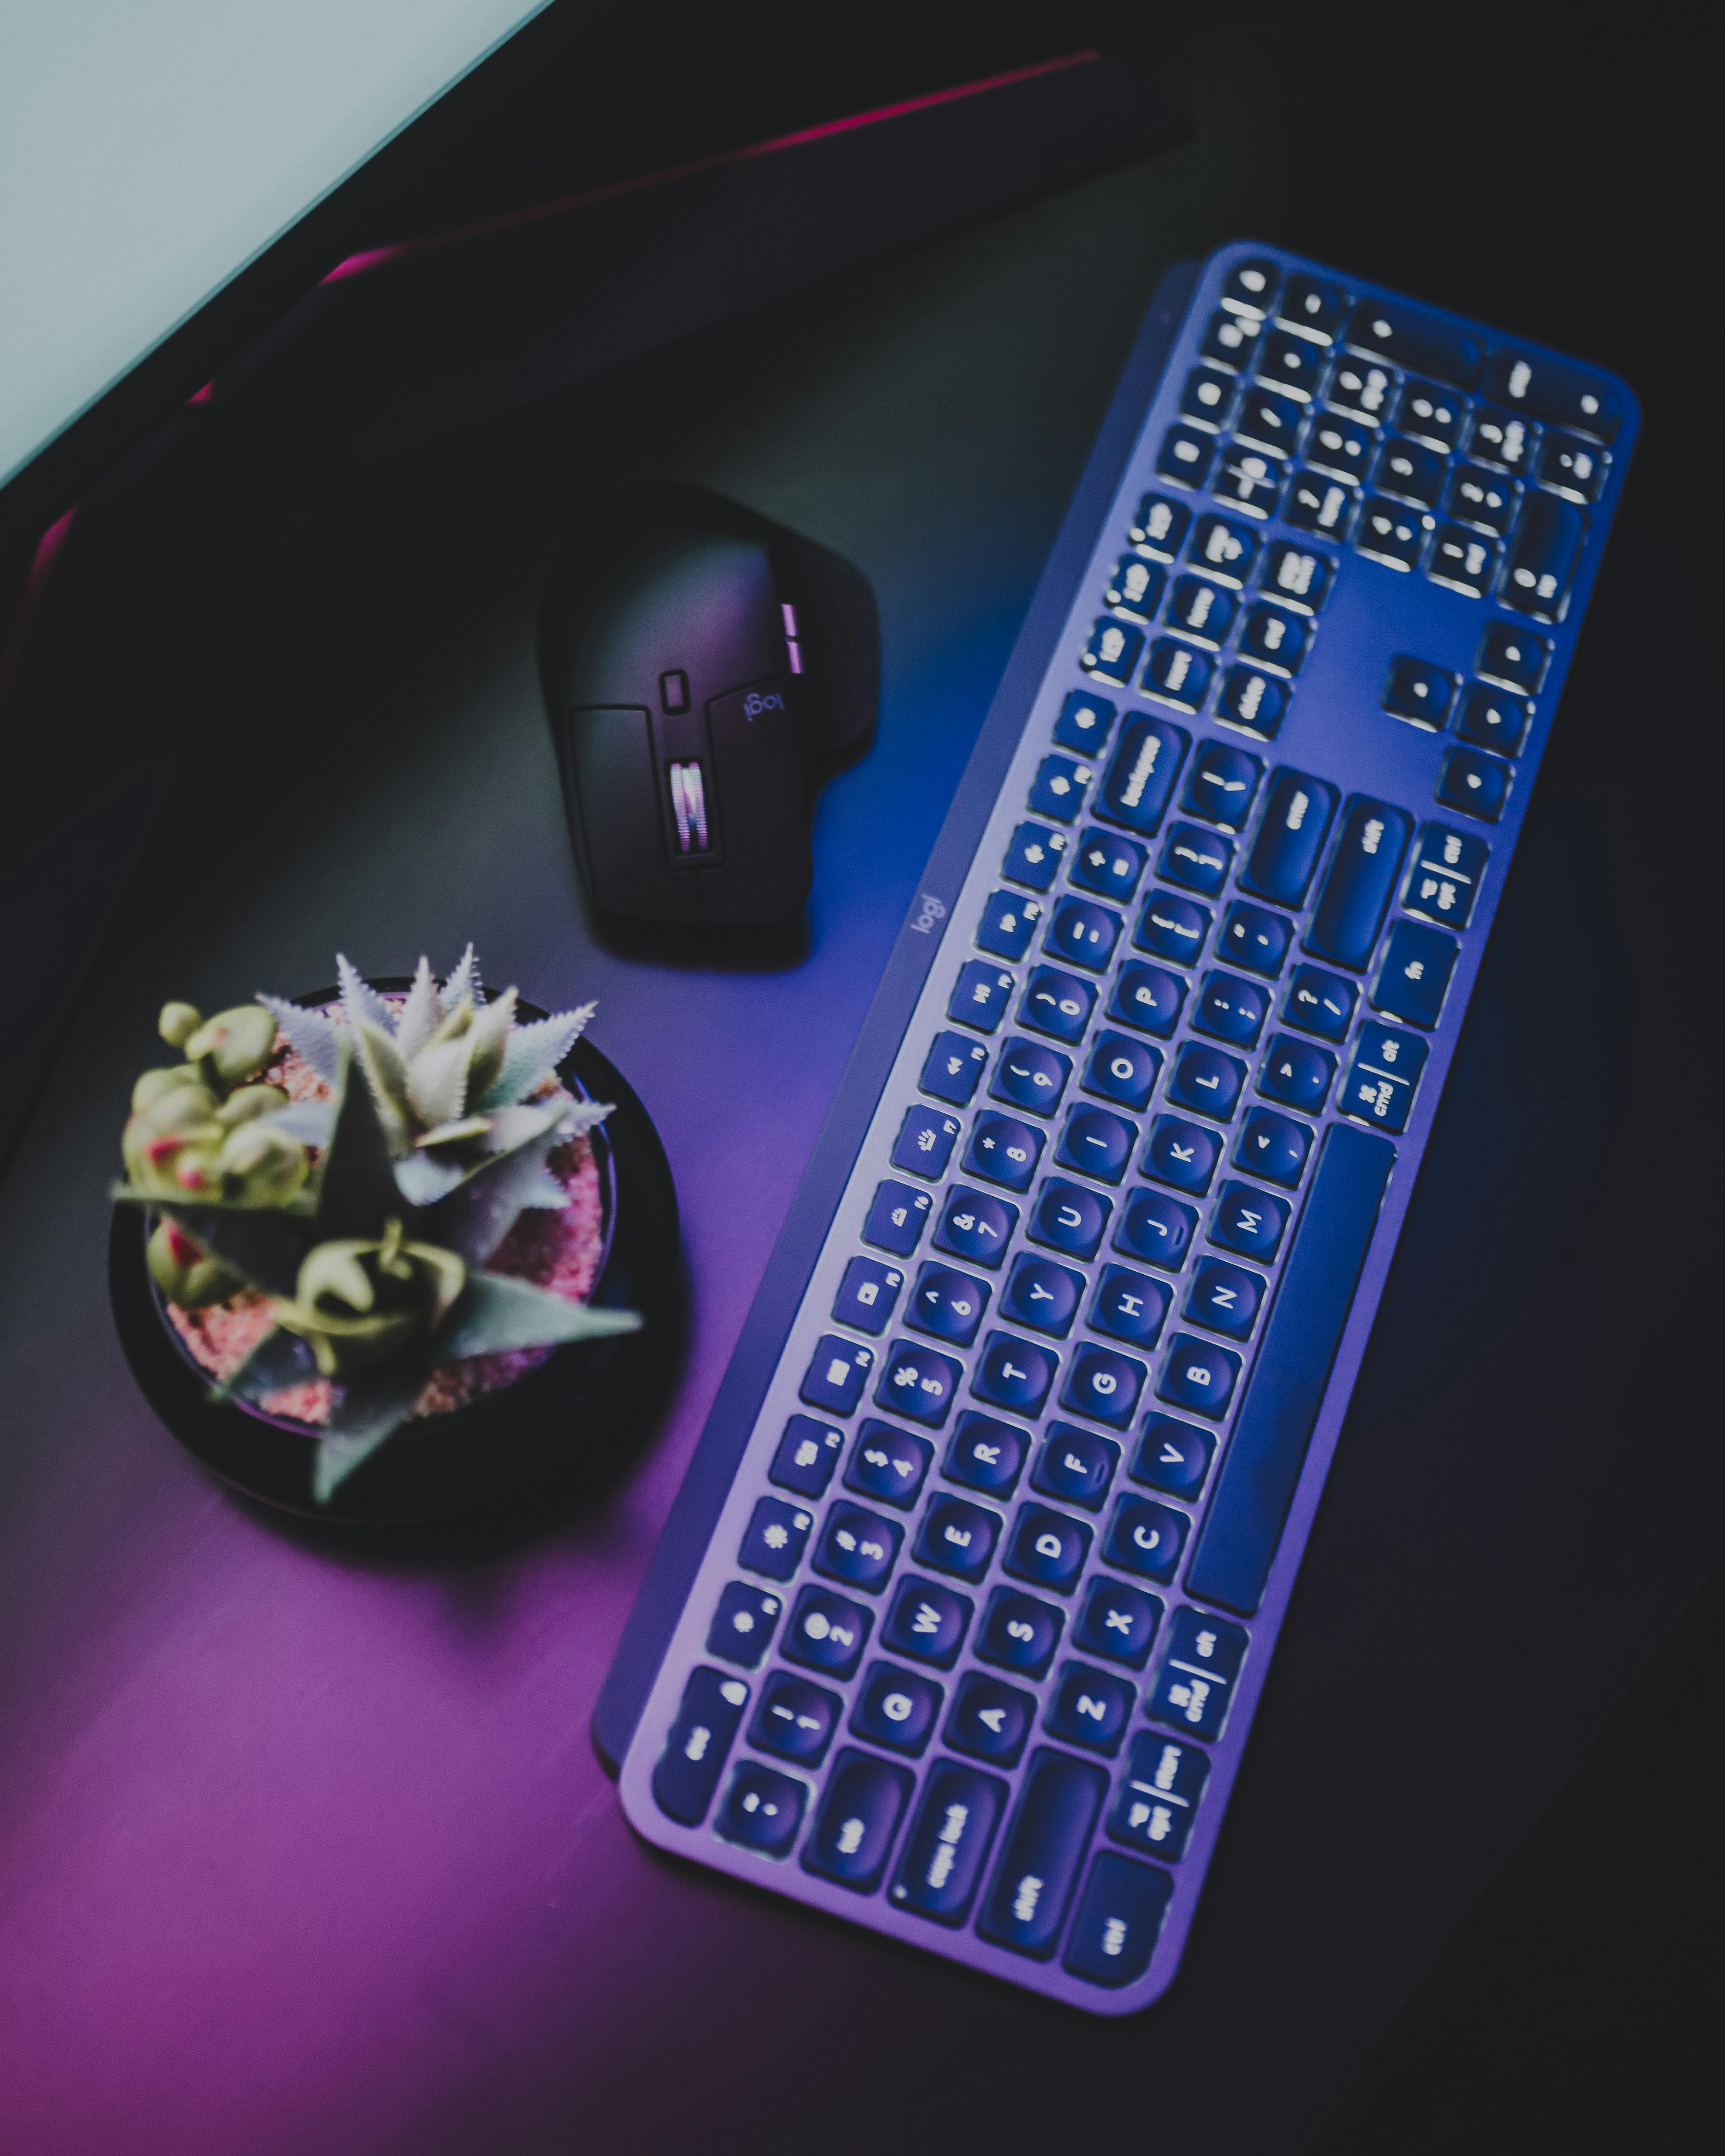 keyboard with wireless computer mouse and succulent at workplace